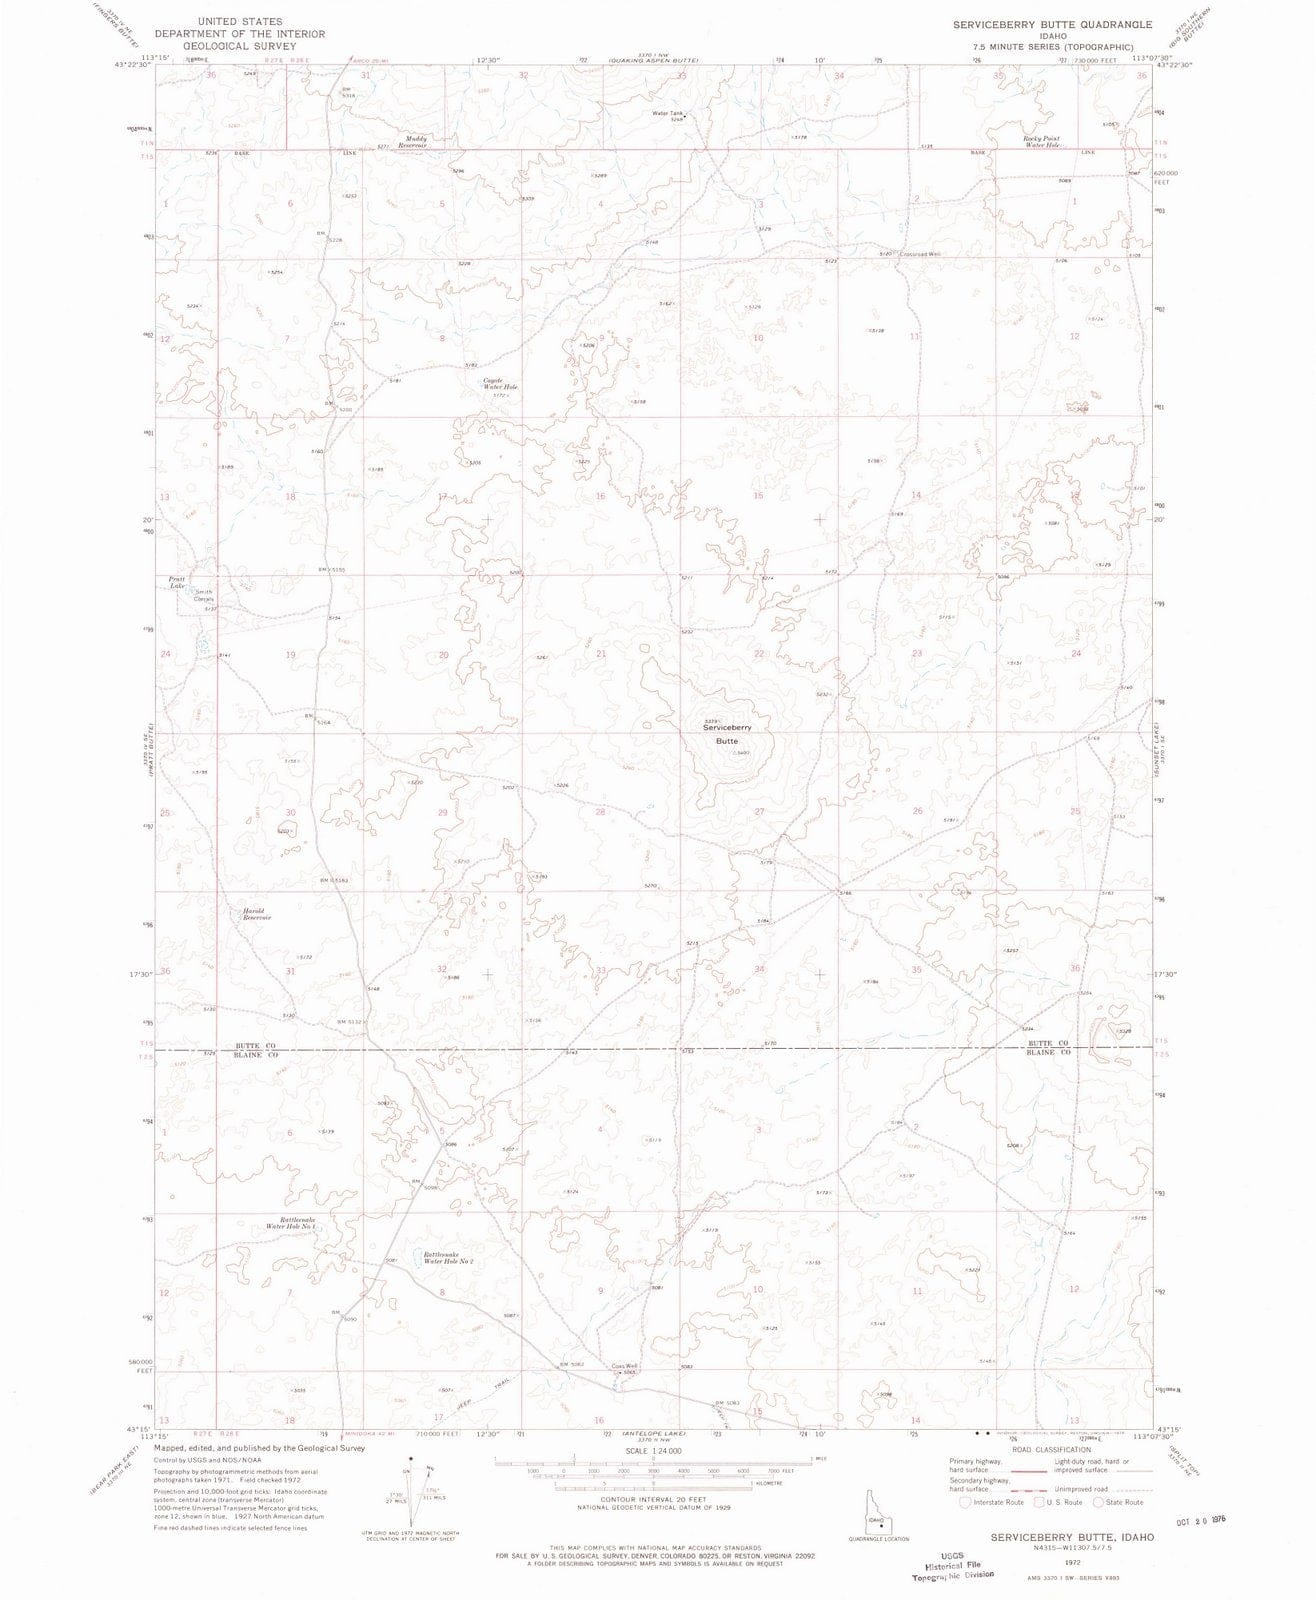 1972 Serviceberry Butte, ID - Idaho - USGS Topographic Map